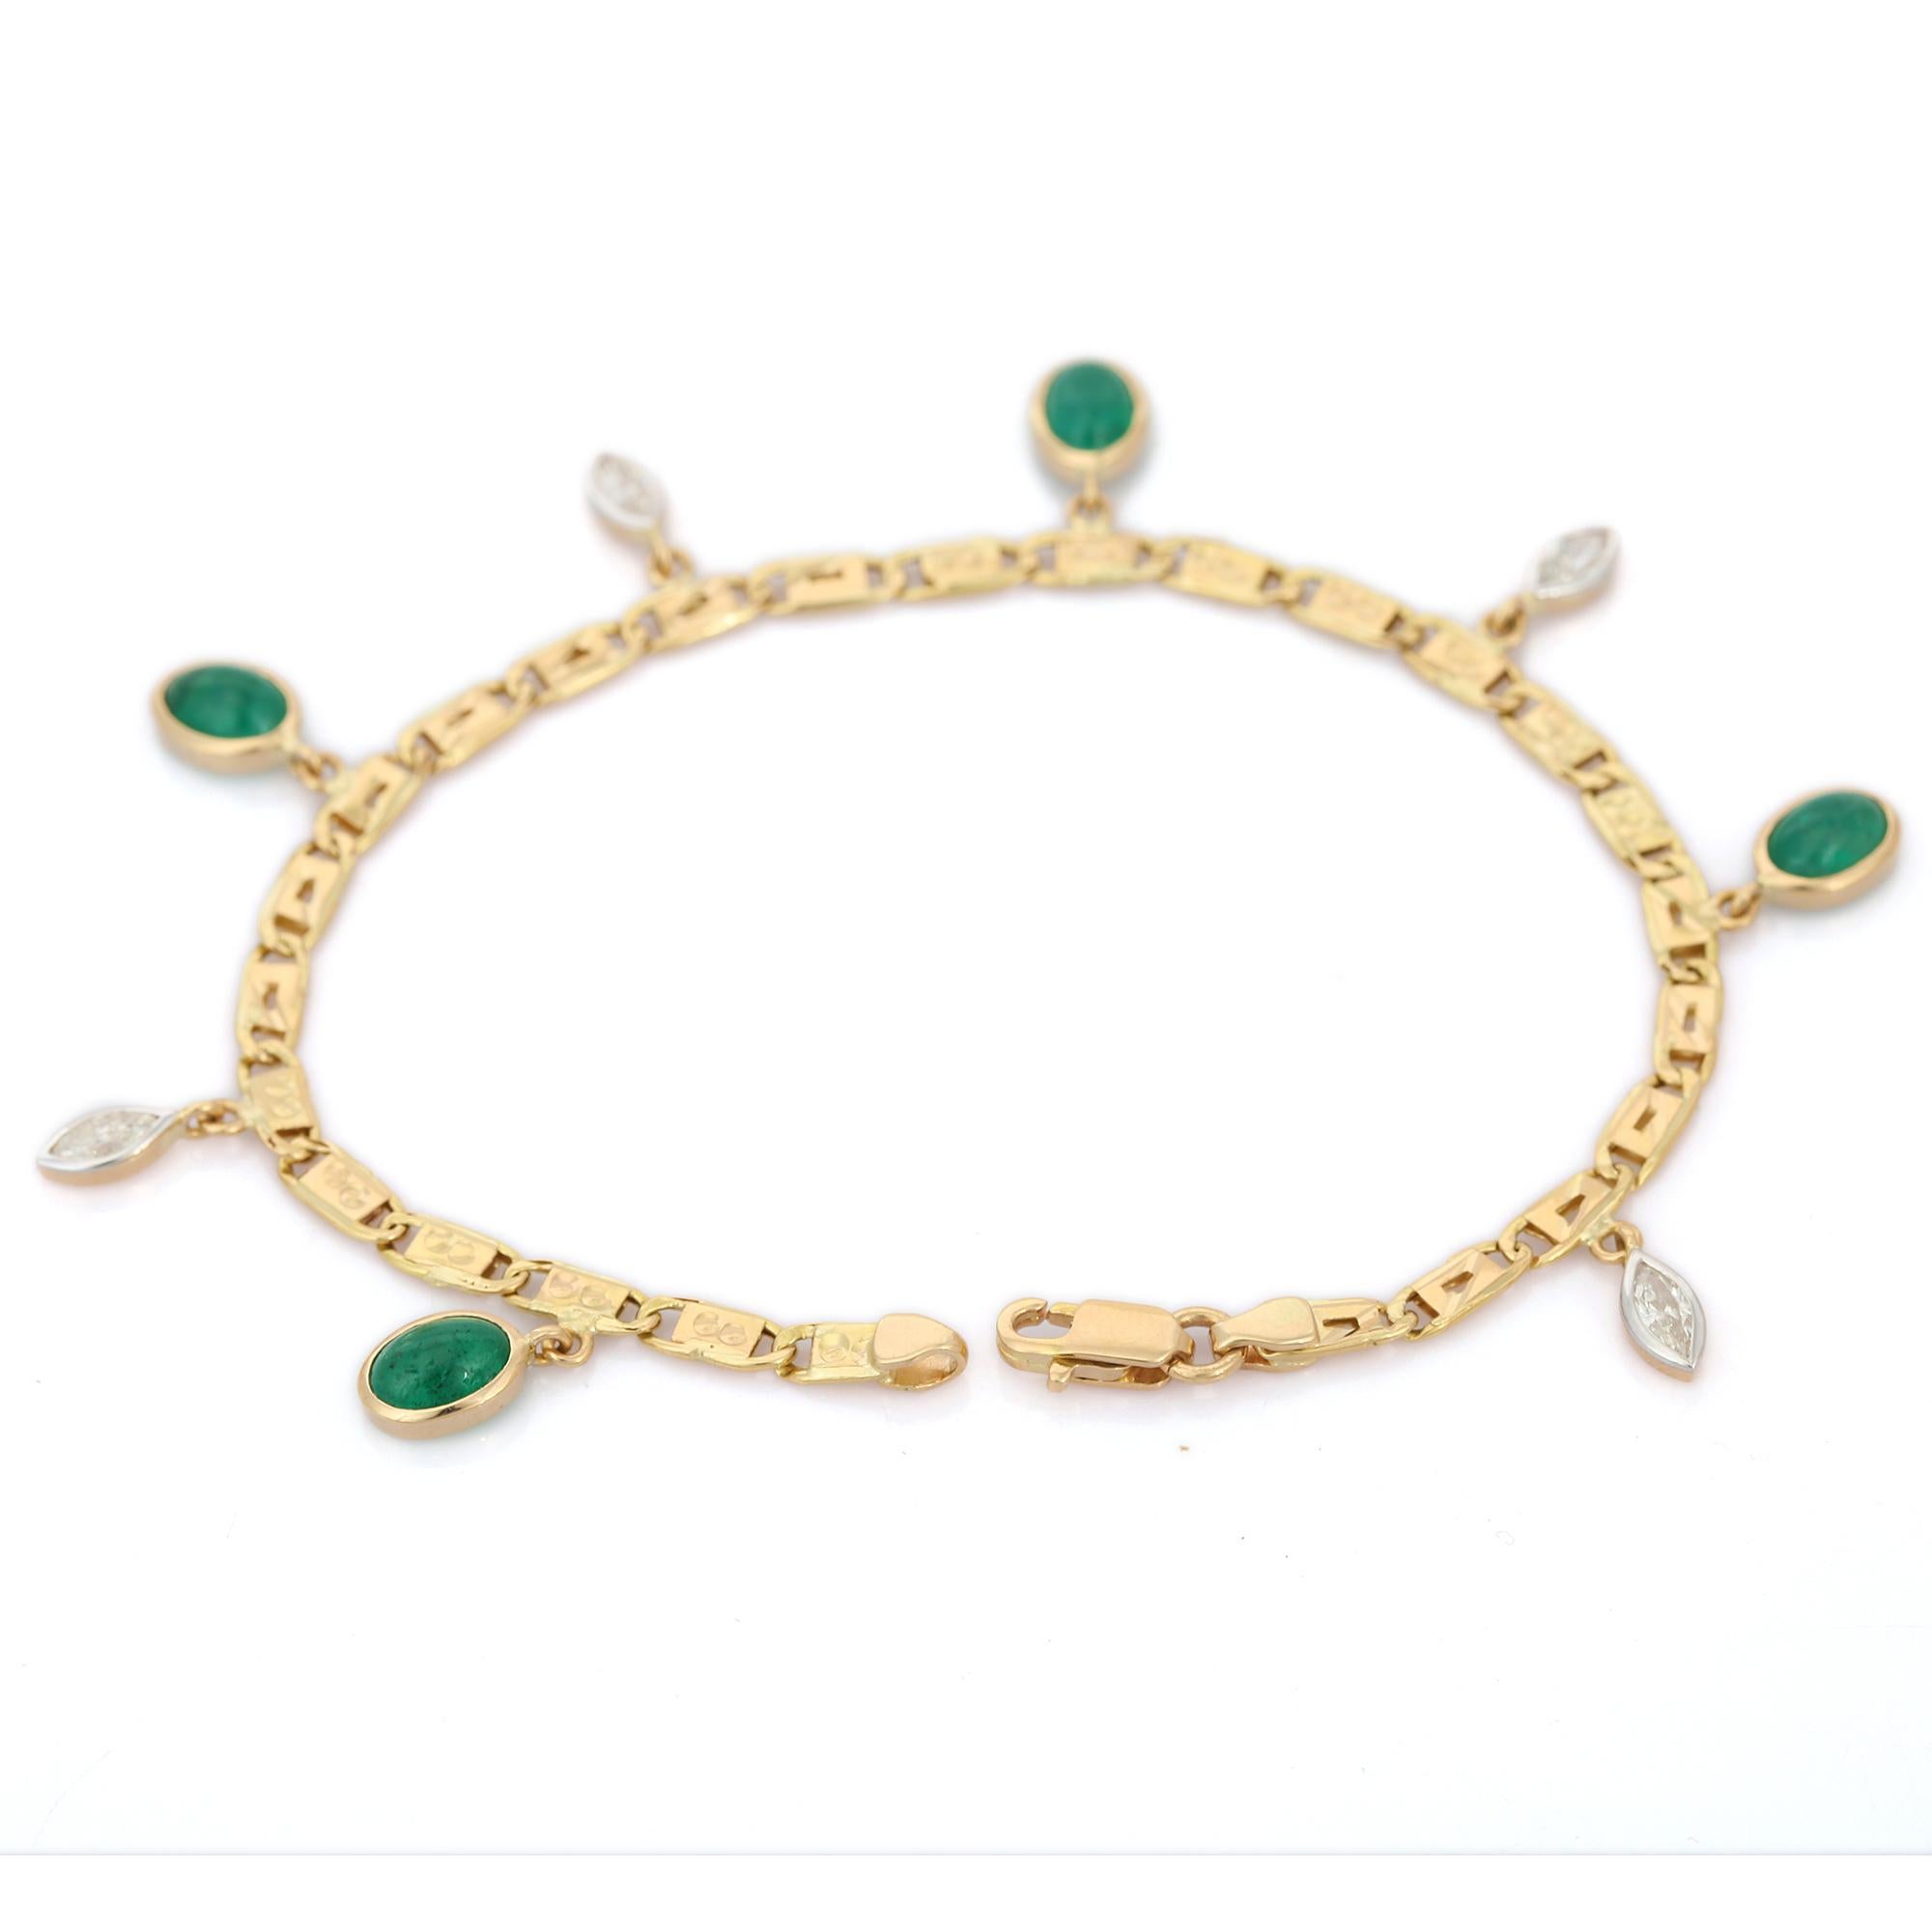 Contemporary Modern Dangling Emerald Diamond Charm Chain Bracelet in 18K Yellow Gold For Sale